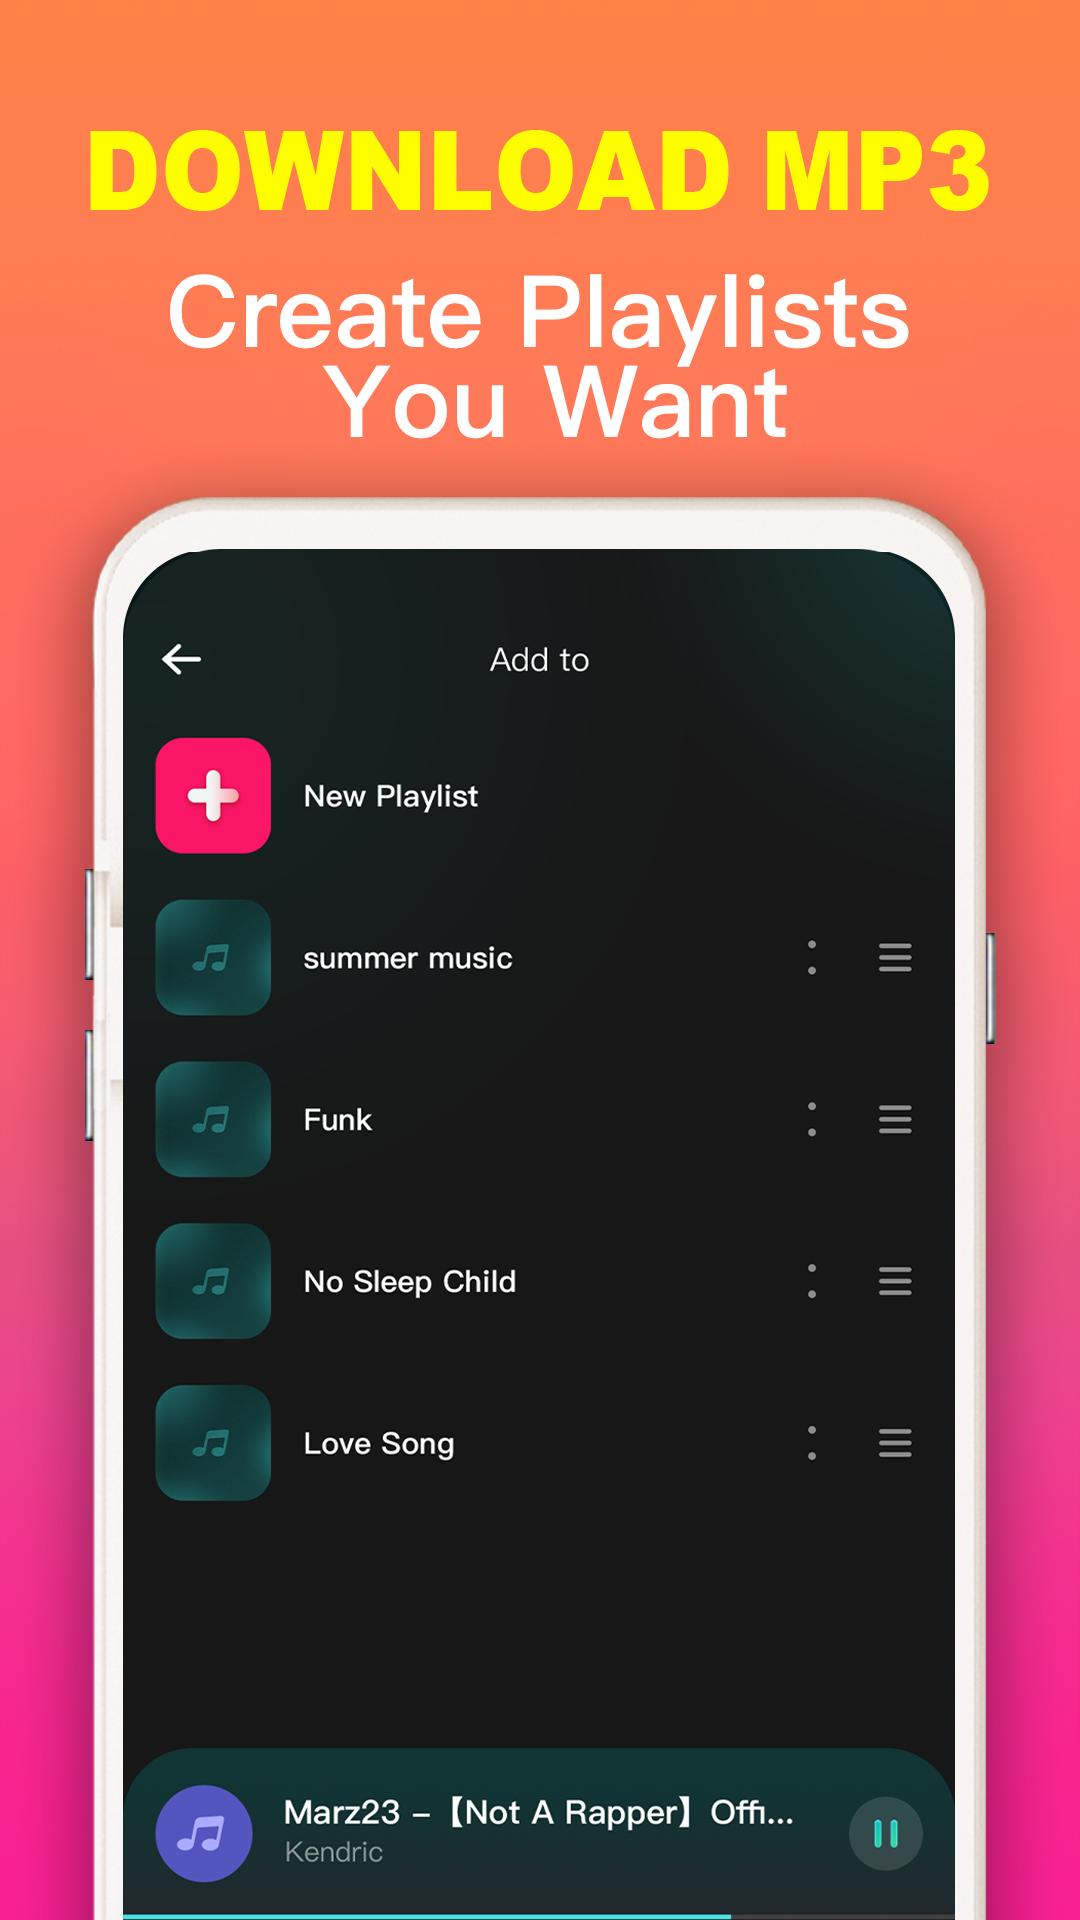 MP3 Music Download APK Download for Android - Latest Version